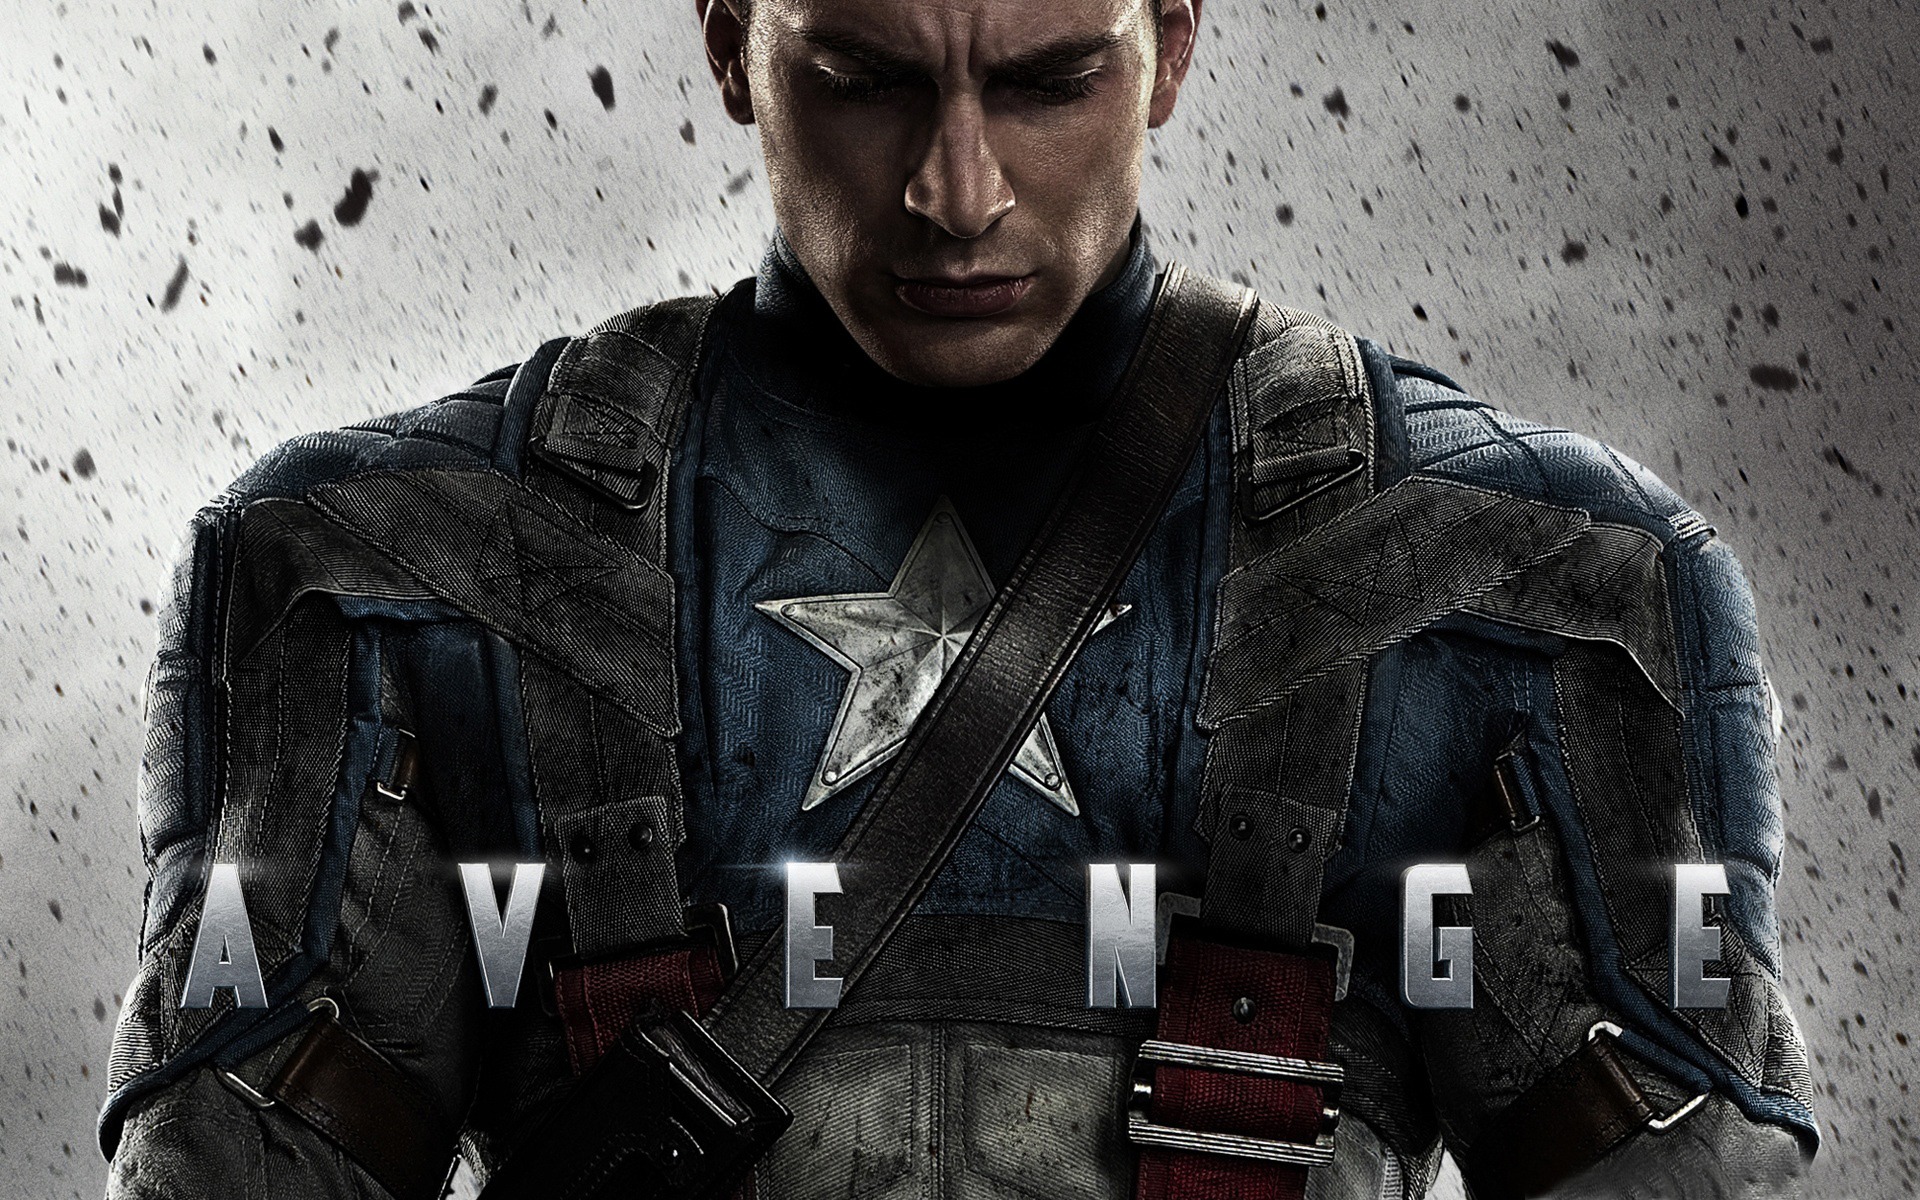 Captain America: The First Avenger wallpapers HD #14 - 1920x1200